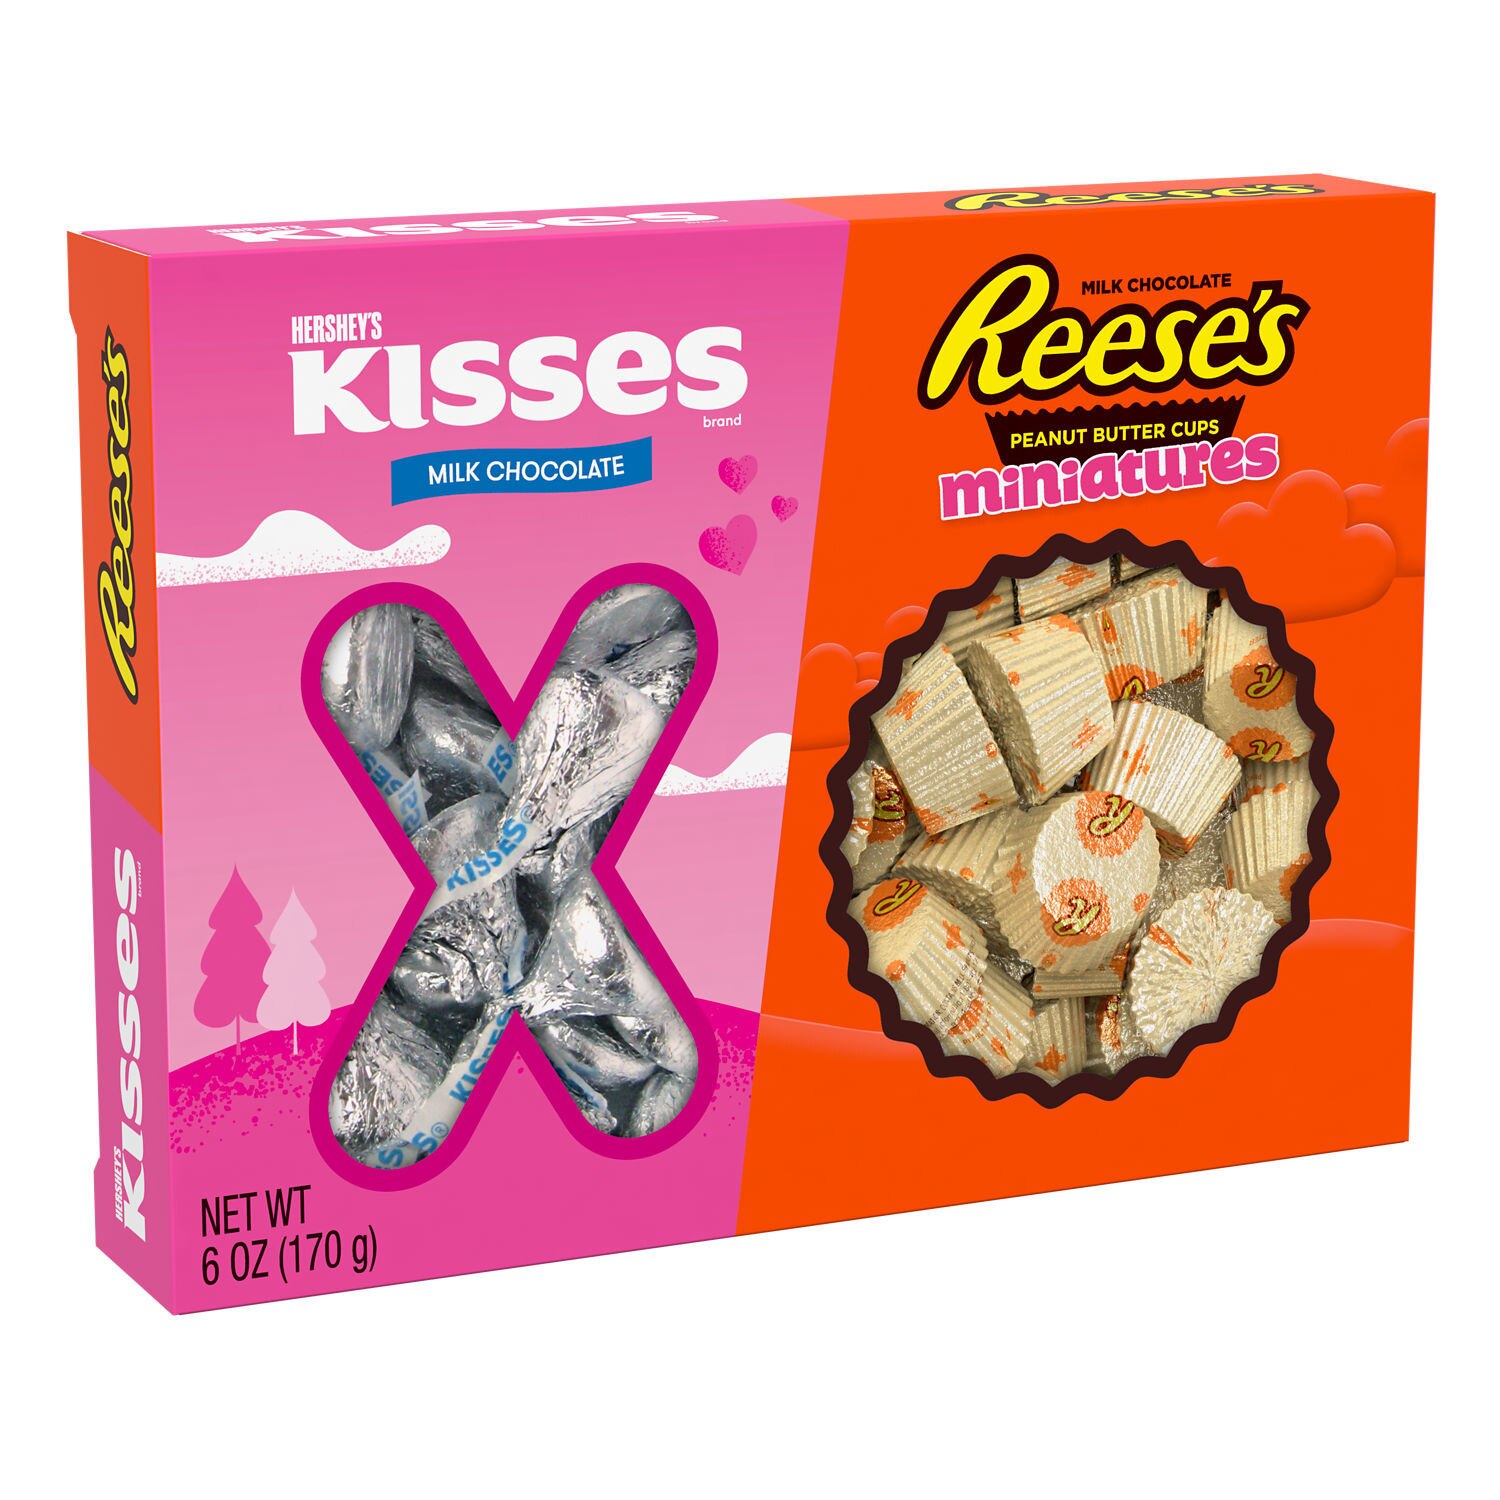 HERSHEY'S And REESE'S Milk Chocolate Assortment Treats, Valentine's Day Candy, 6 Oz , CVS